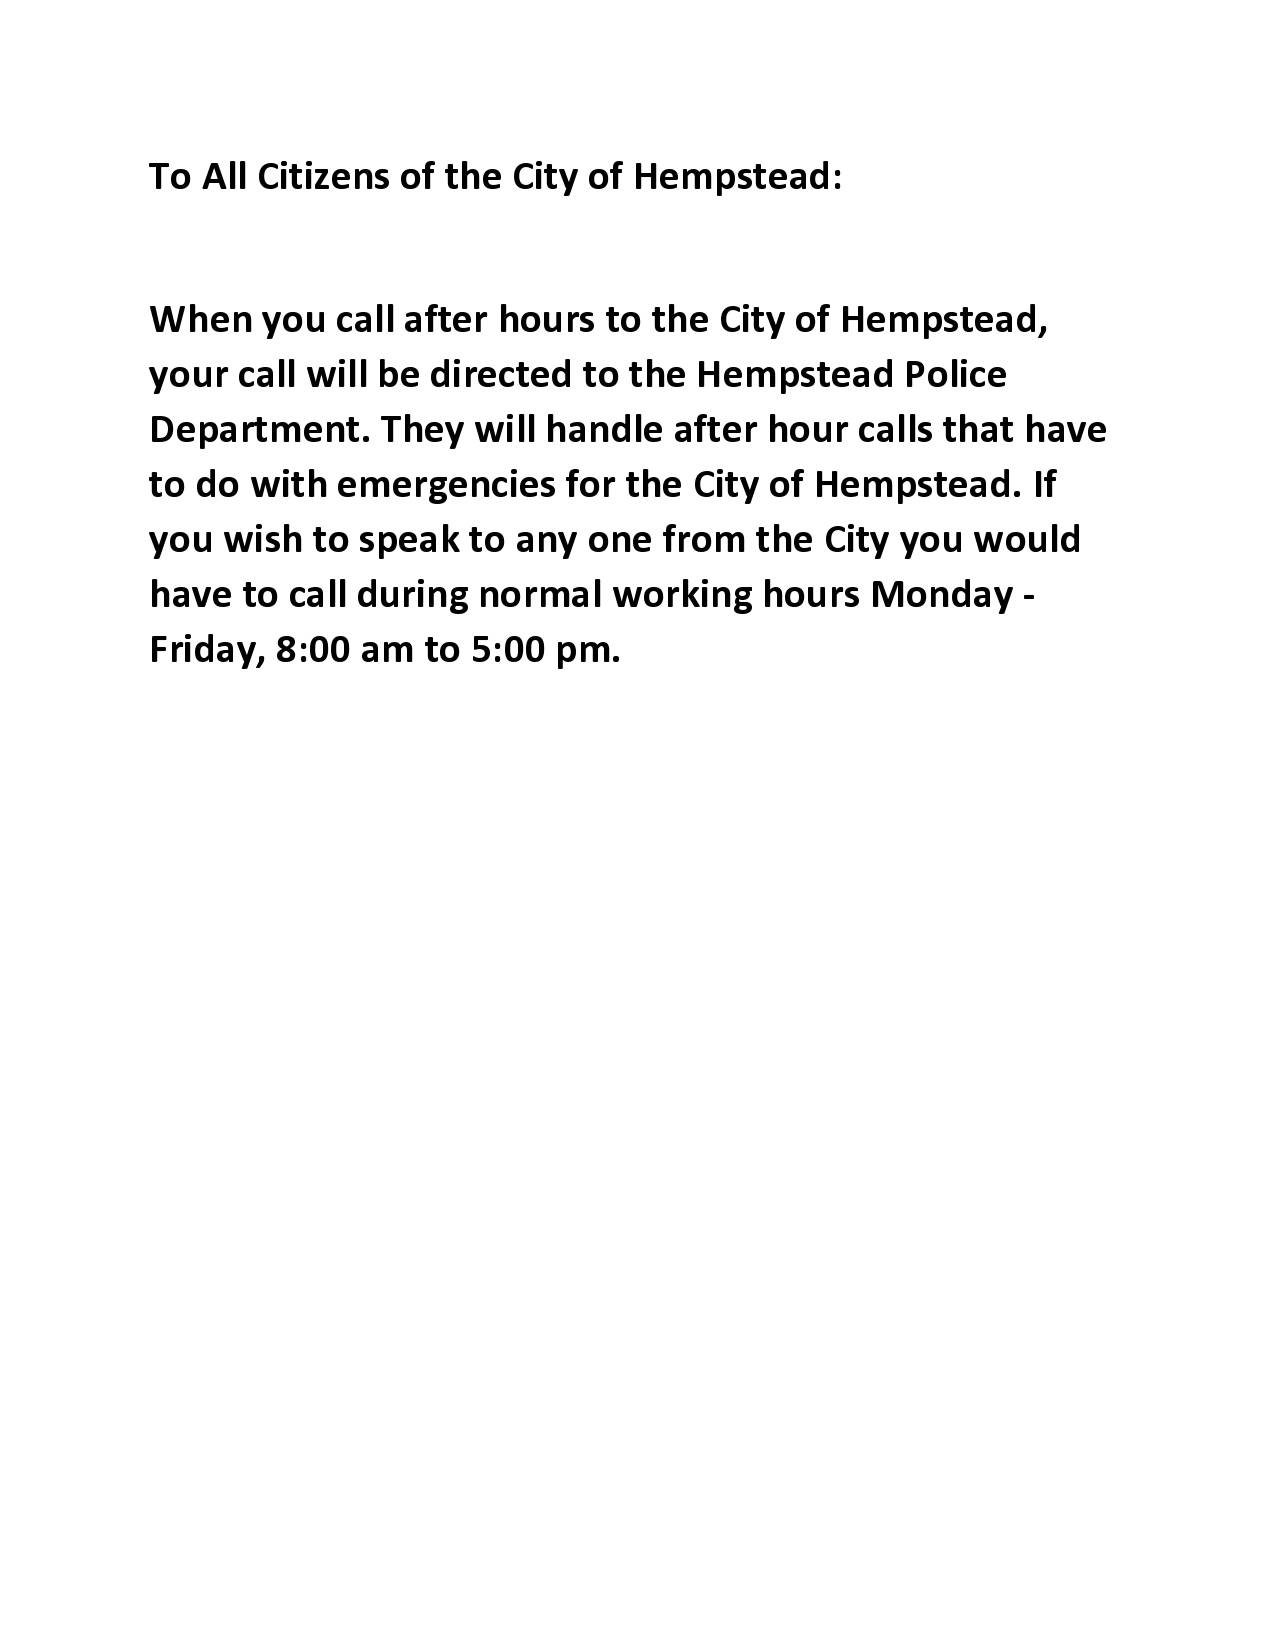 To All Citizens of the City of Hempstead-page0001 - Copy